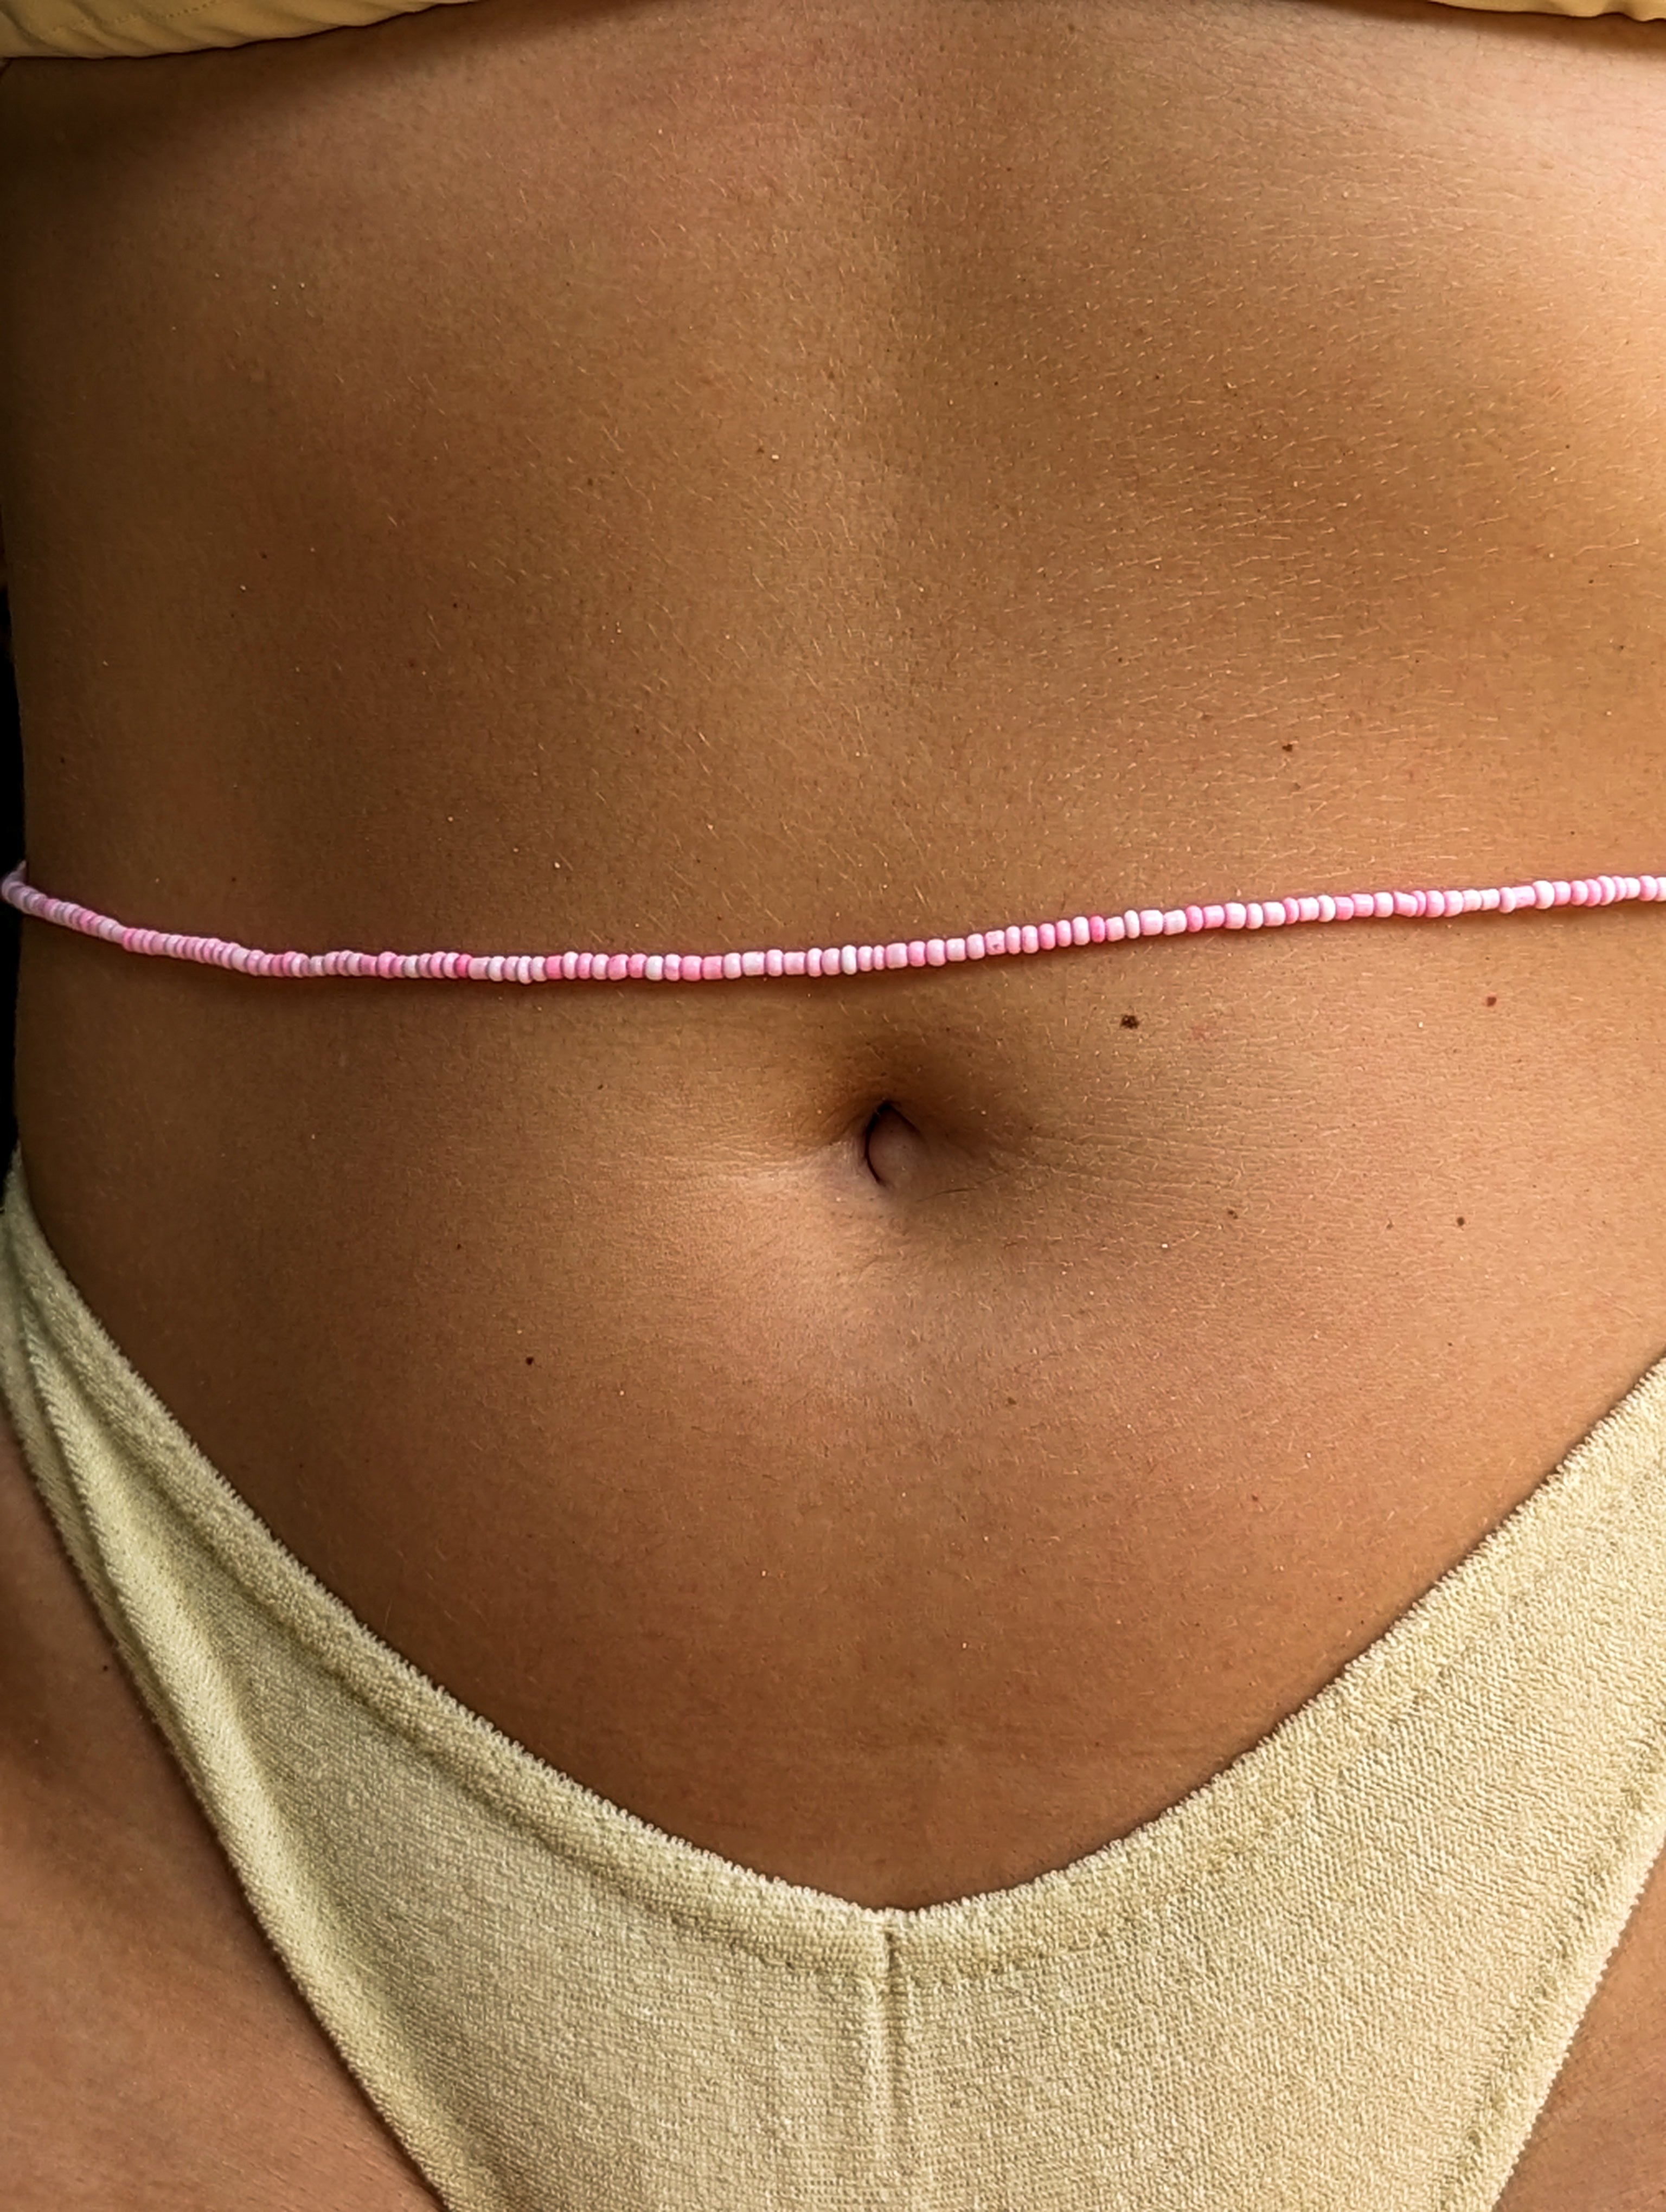 [THE ONE] Belly Chain: Pink [Small Beads]